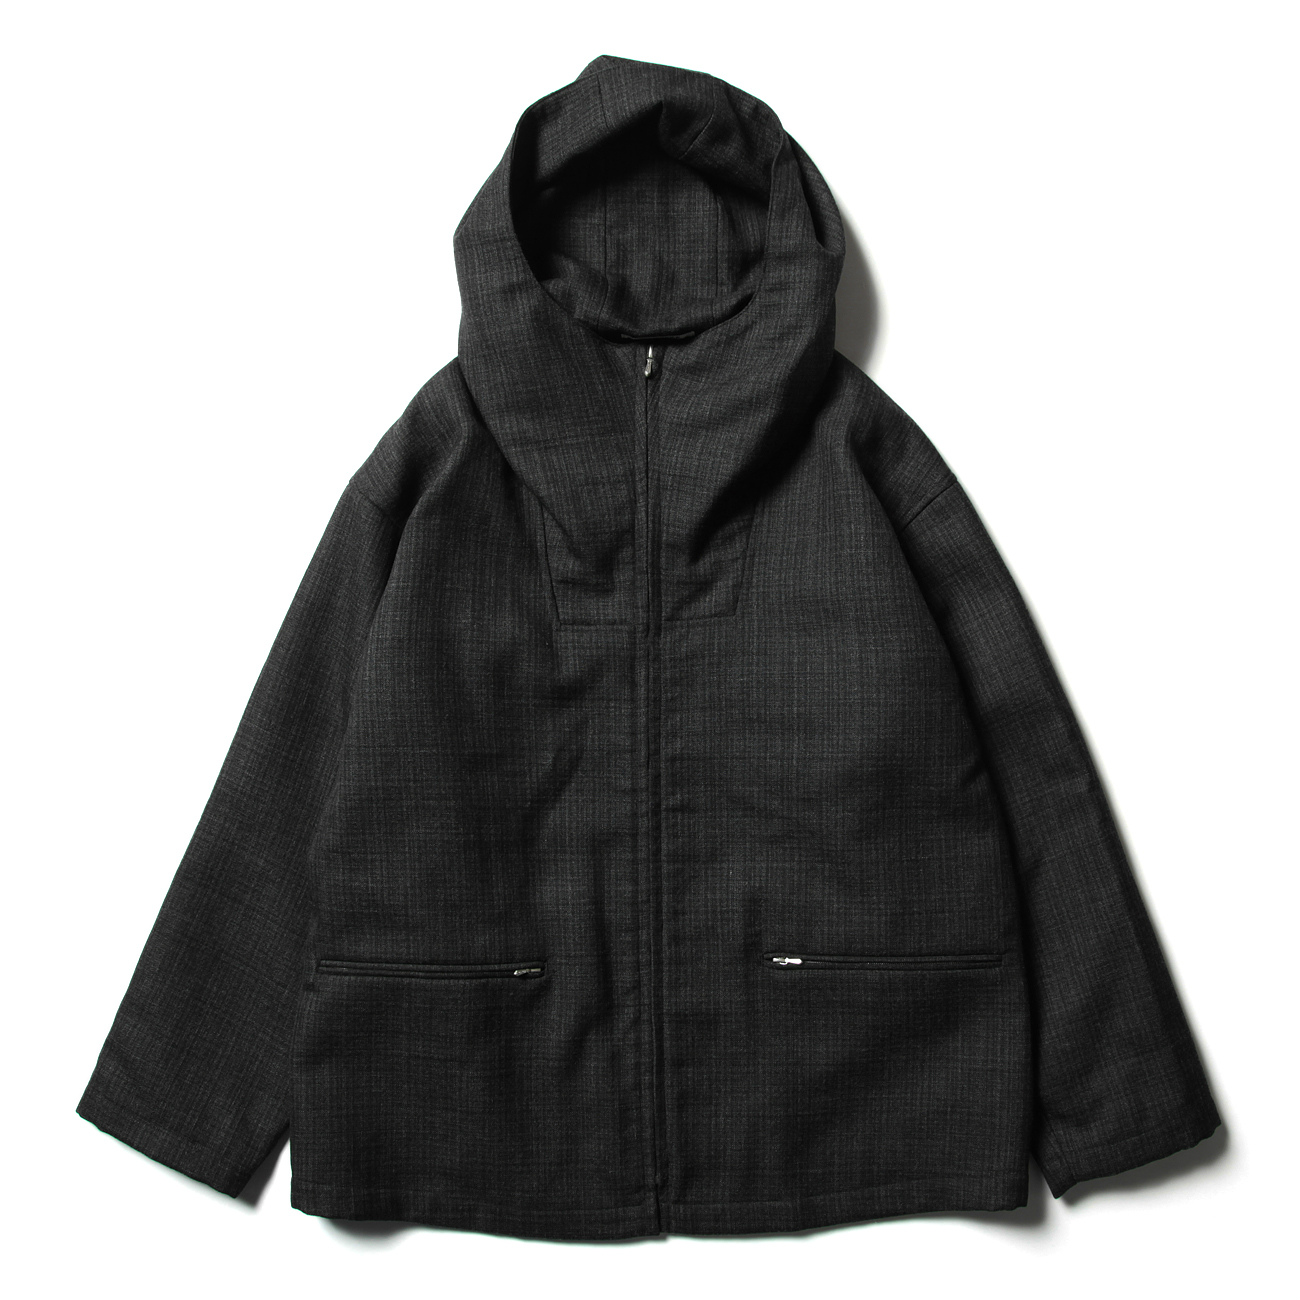 BLUEFACED WOOL DOUBLE CLOTH ZIP HOODIE (メンズ) - Mix Charcoal